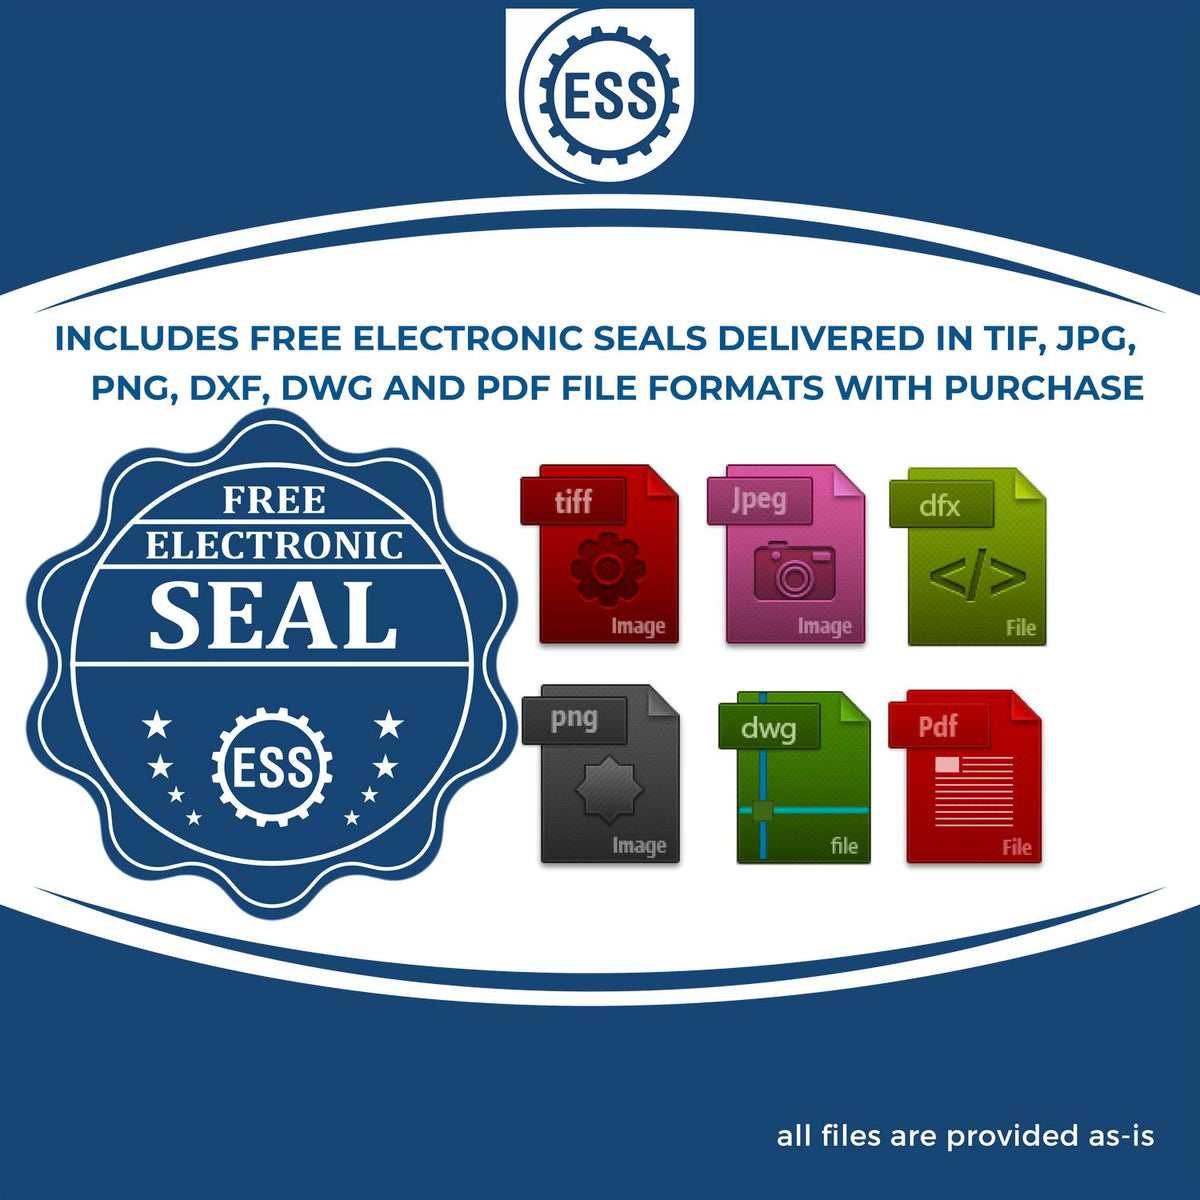 An infographic for the free electronic seal for the Soft Ohio Professional Engineer Seal illustrating the different file type icons such as DXF, DWG, TIF, JPG and PNG.